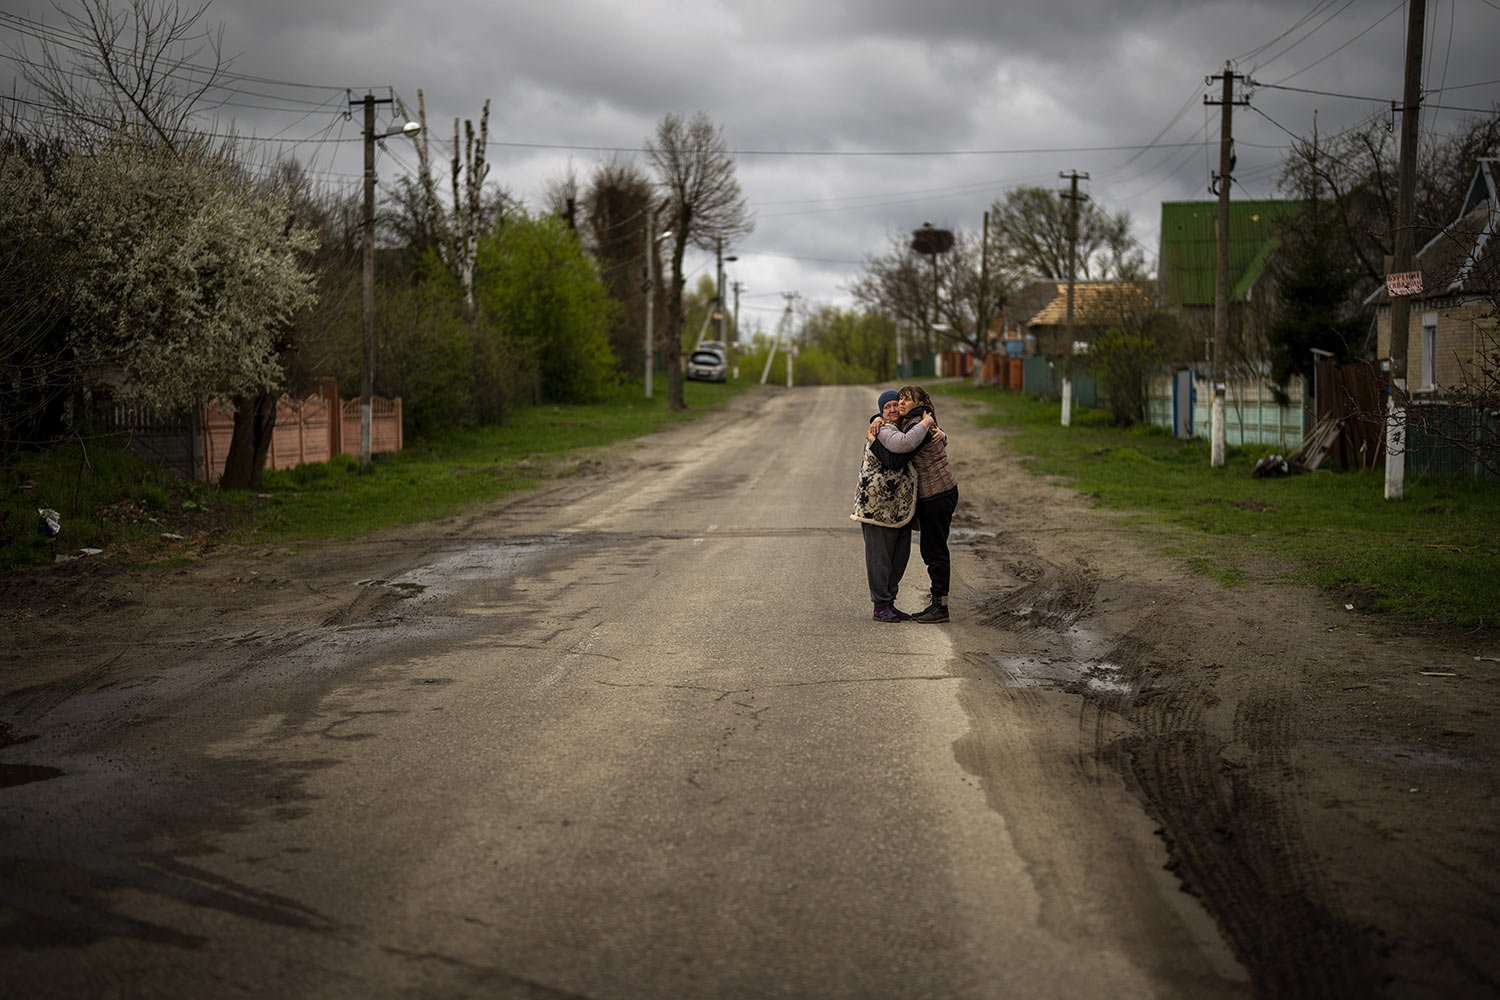  Tetyana Boikiv, 52, right, hugs her neighbor Svitlana Pryimachenko, 48, during the funeral of her husband Mykola Moroz, 47, in Ozera village near Bucha, Ukraine, Tuesday, April 26, 2022. Mykola was captured by Russian soldiers from his home in Ozera